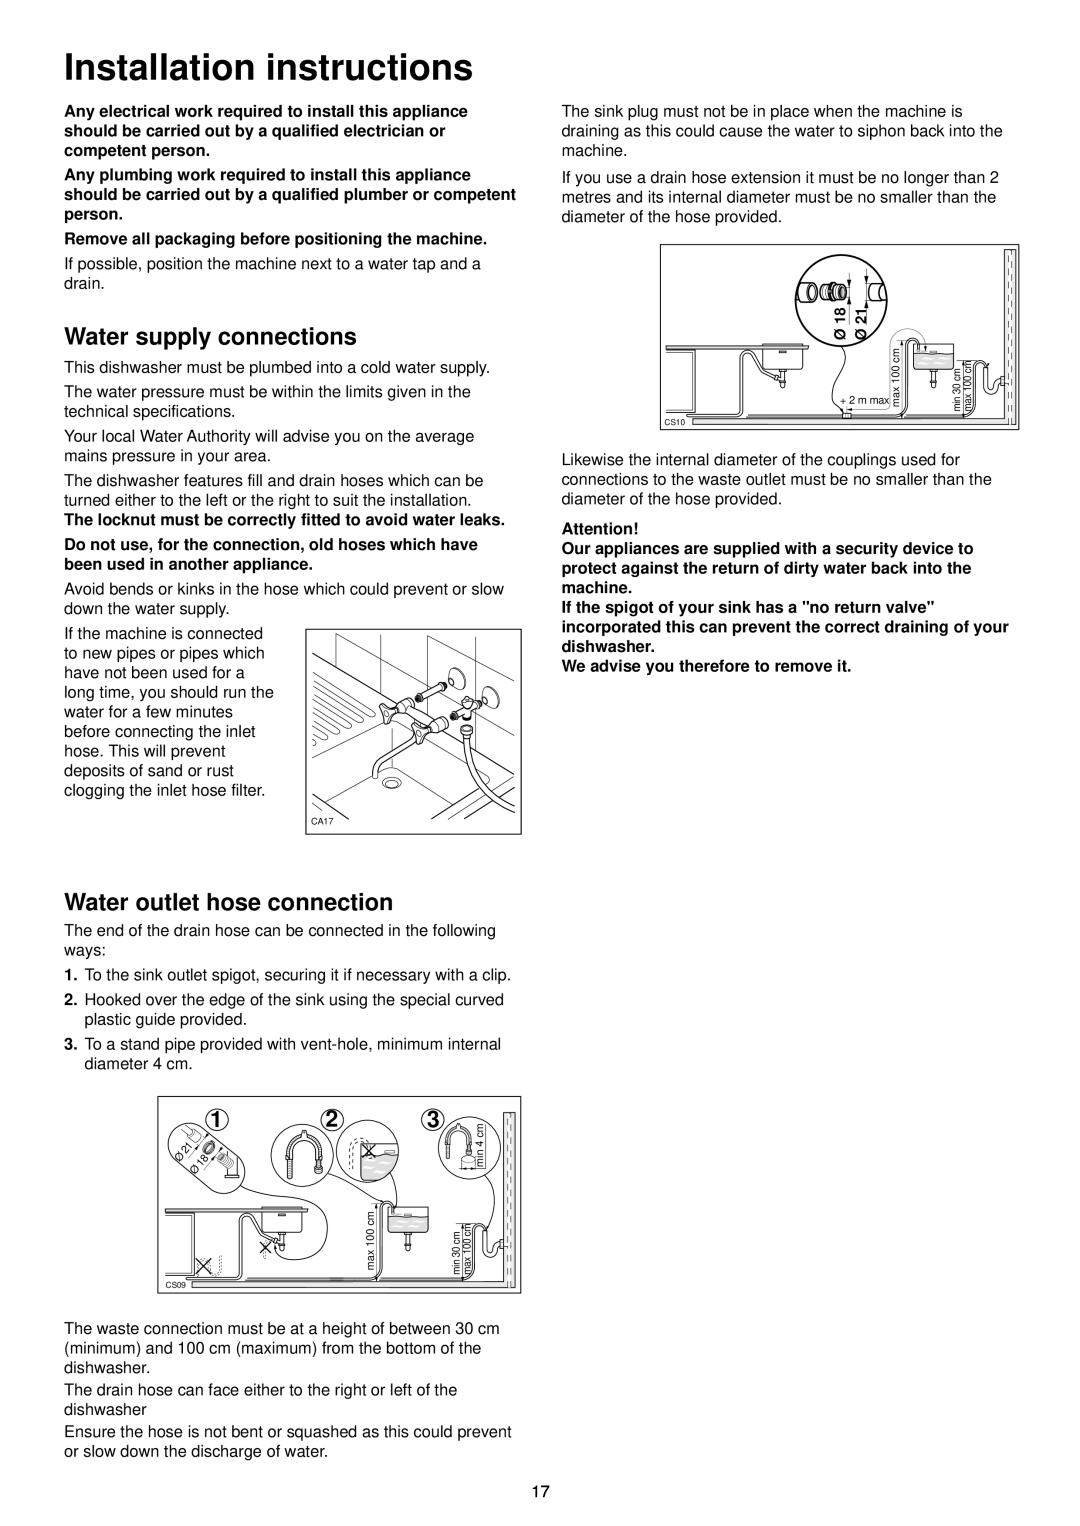 Zanussi DE 6755 manual Installation instructions, Water supply connections, Water outlet hose connection 